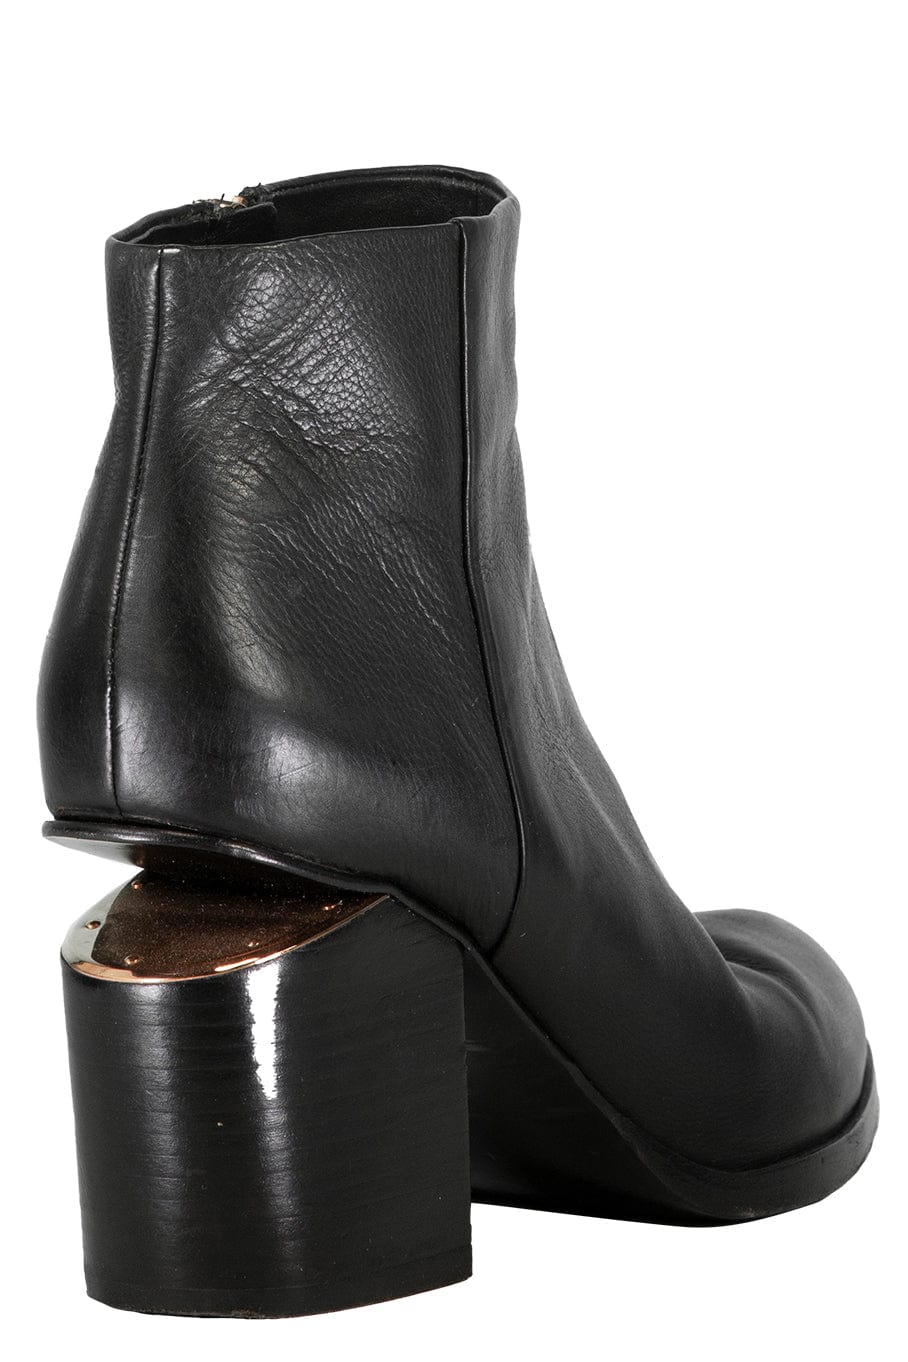 ALEXANDER WANG-Leather Ankle Boots-BLACK